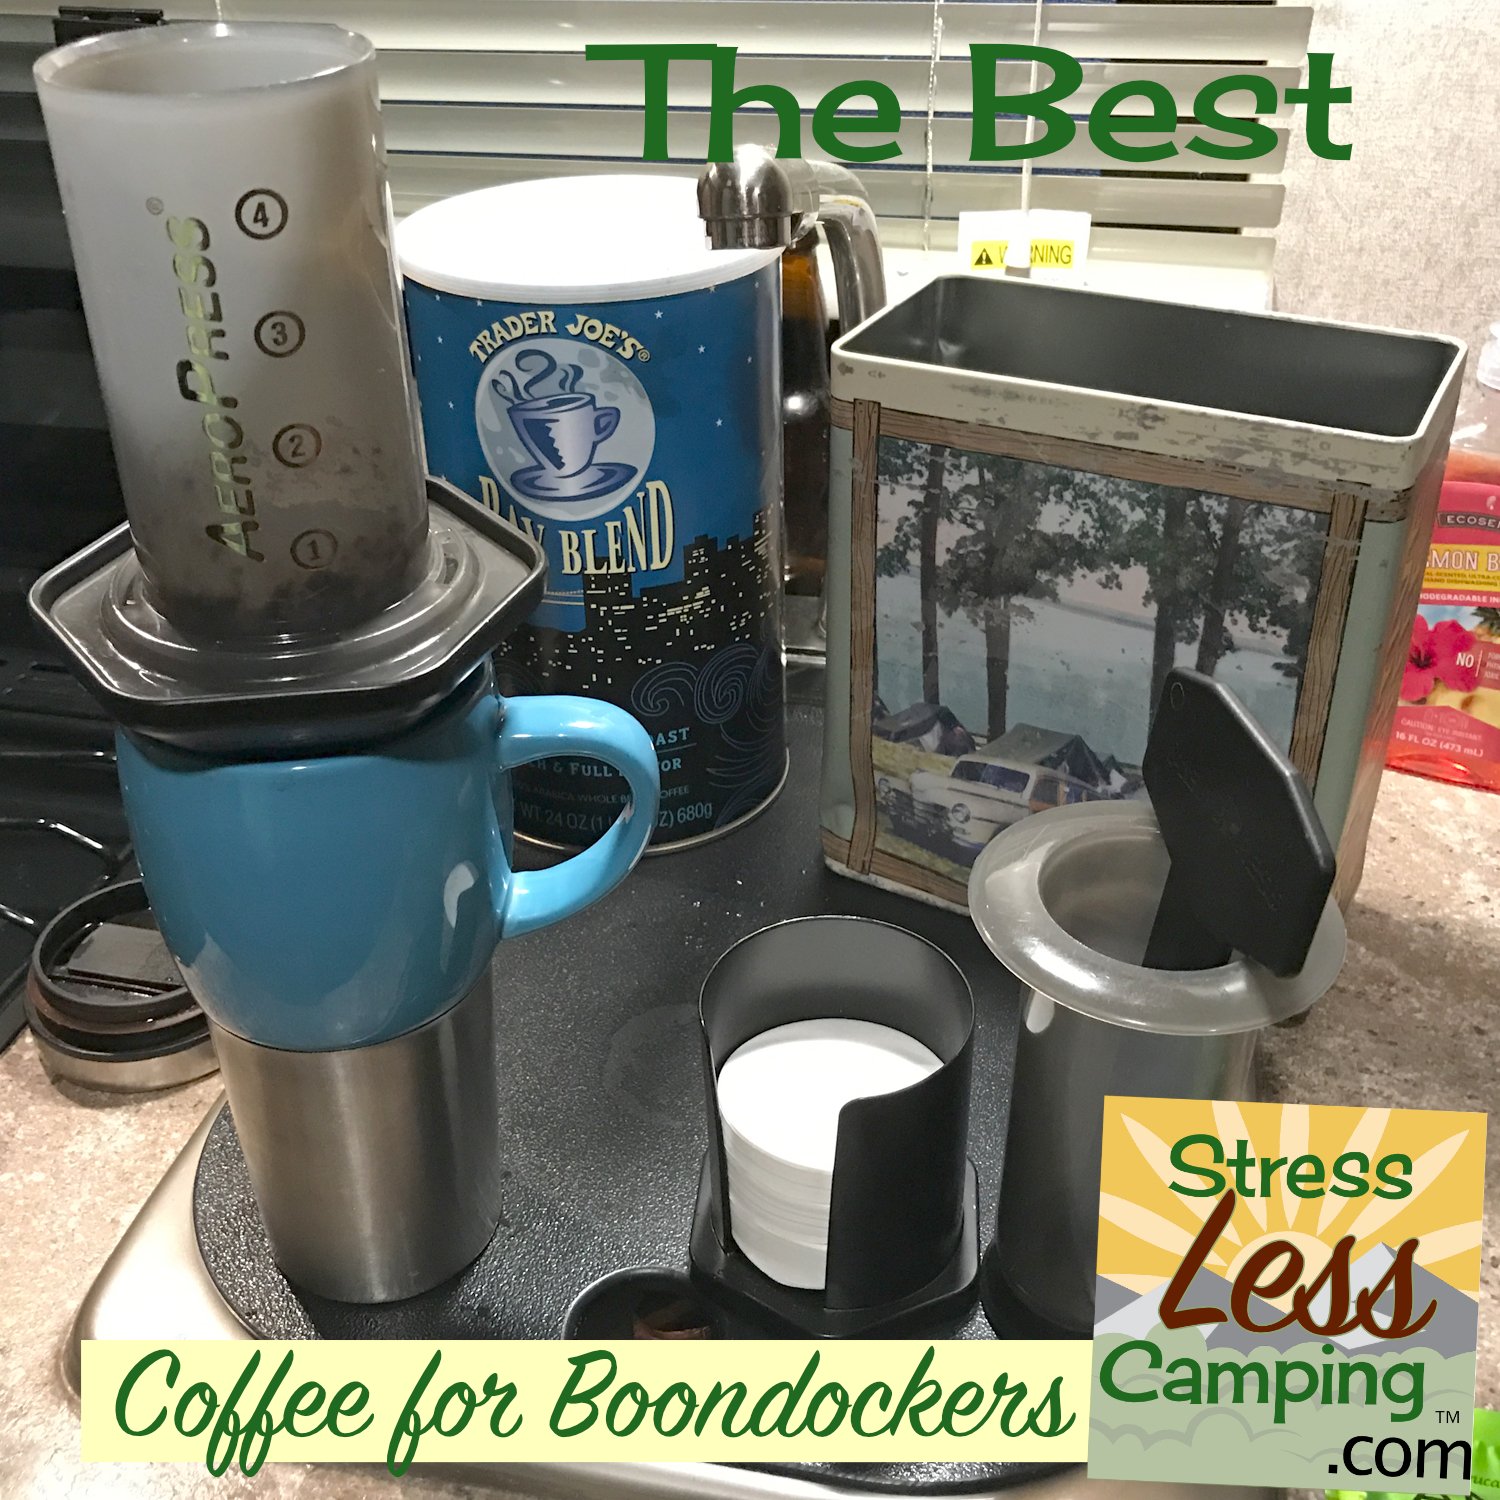 The best coffee maker for boondockers